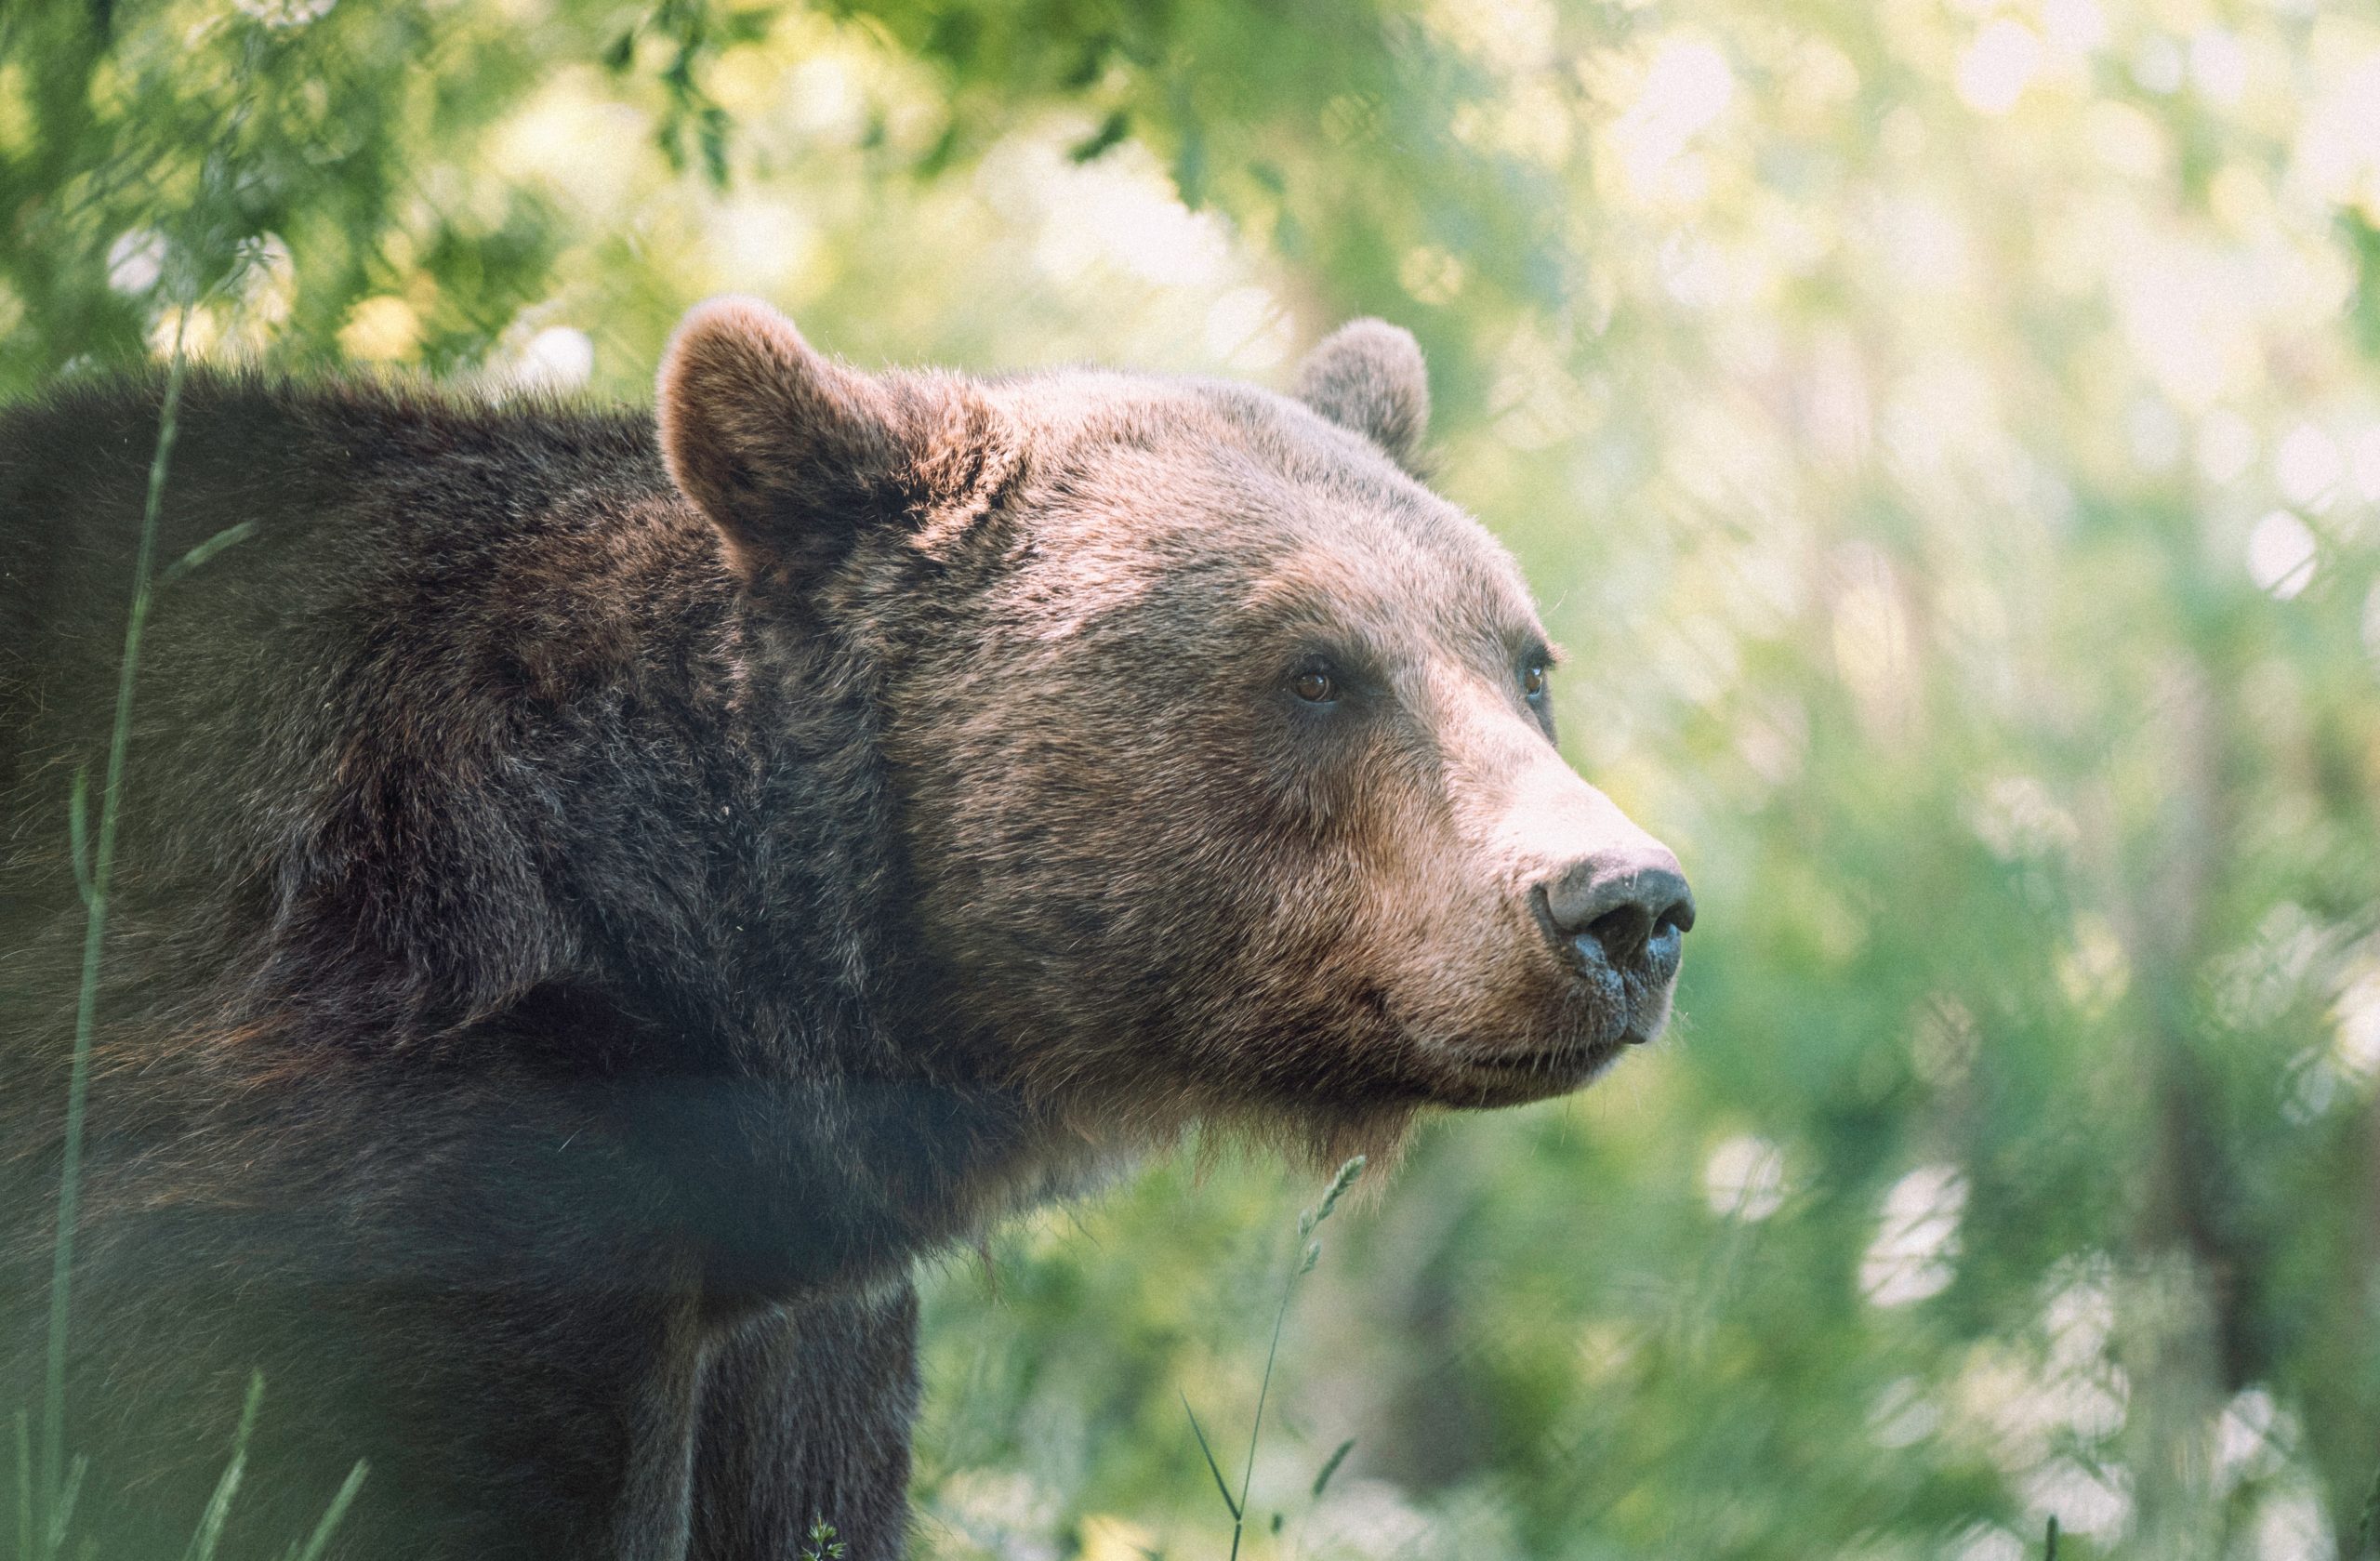 Dealing with Bears while Hiking and Backpacking